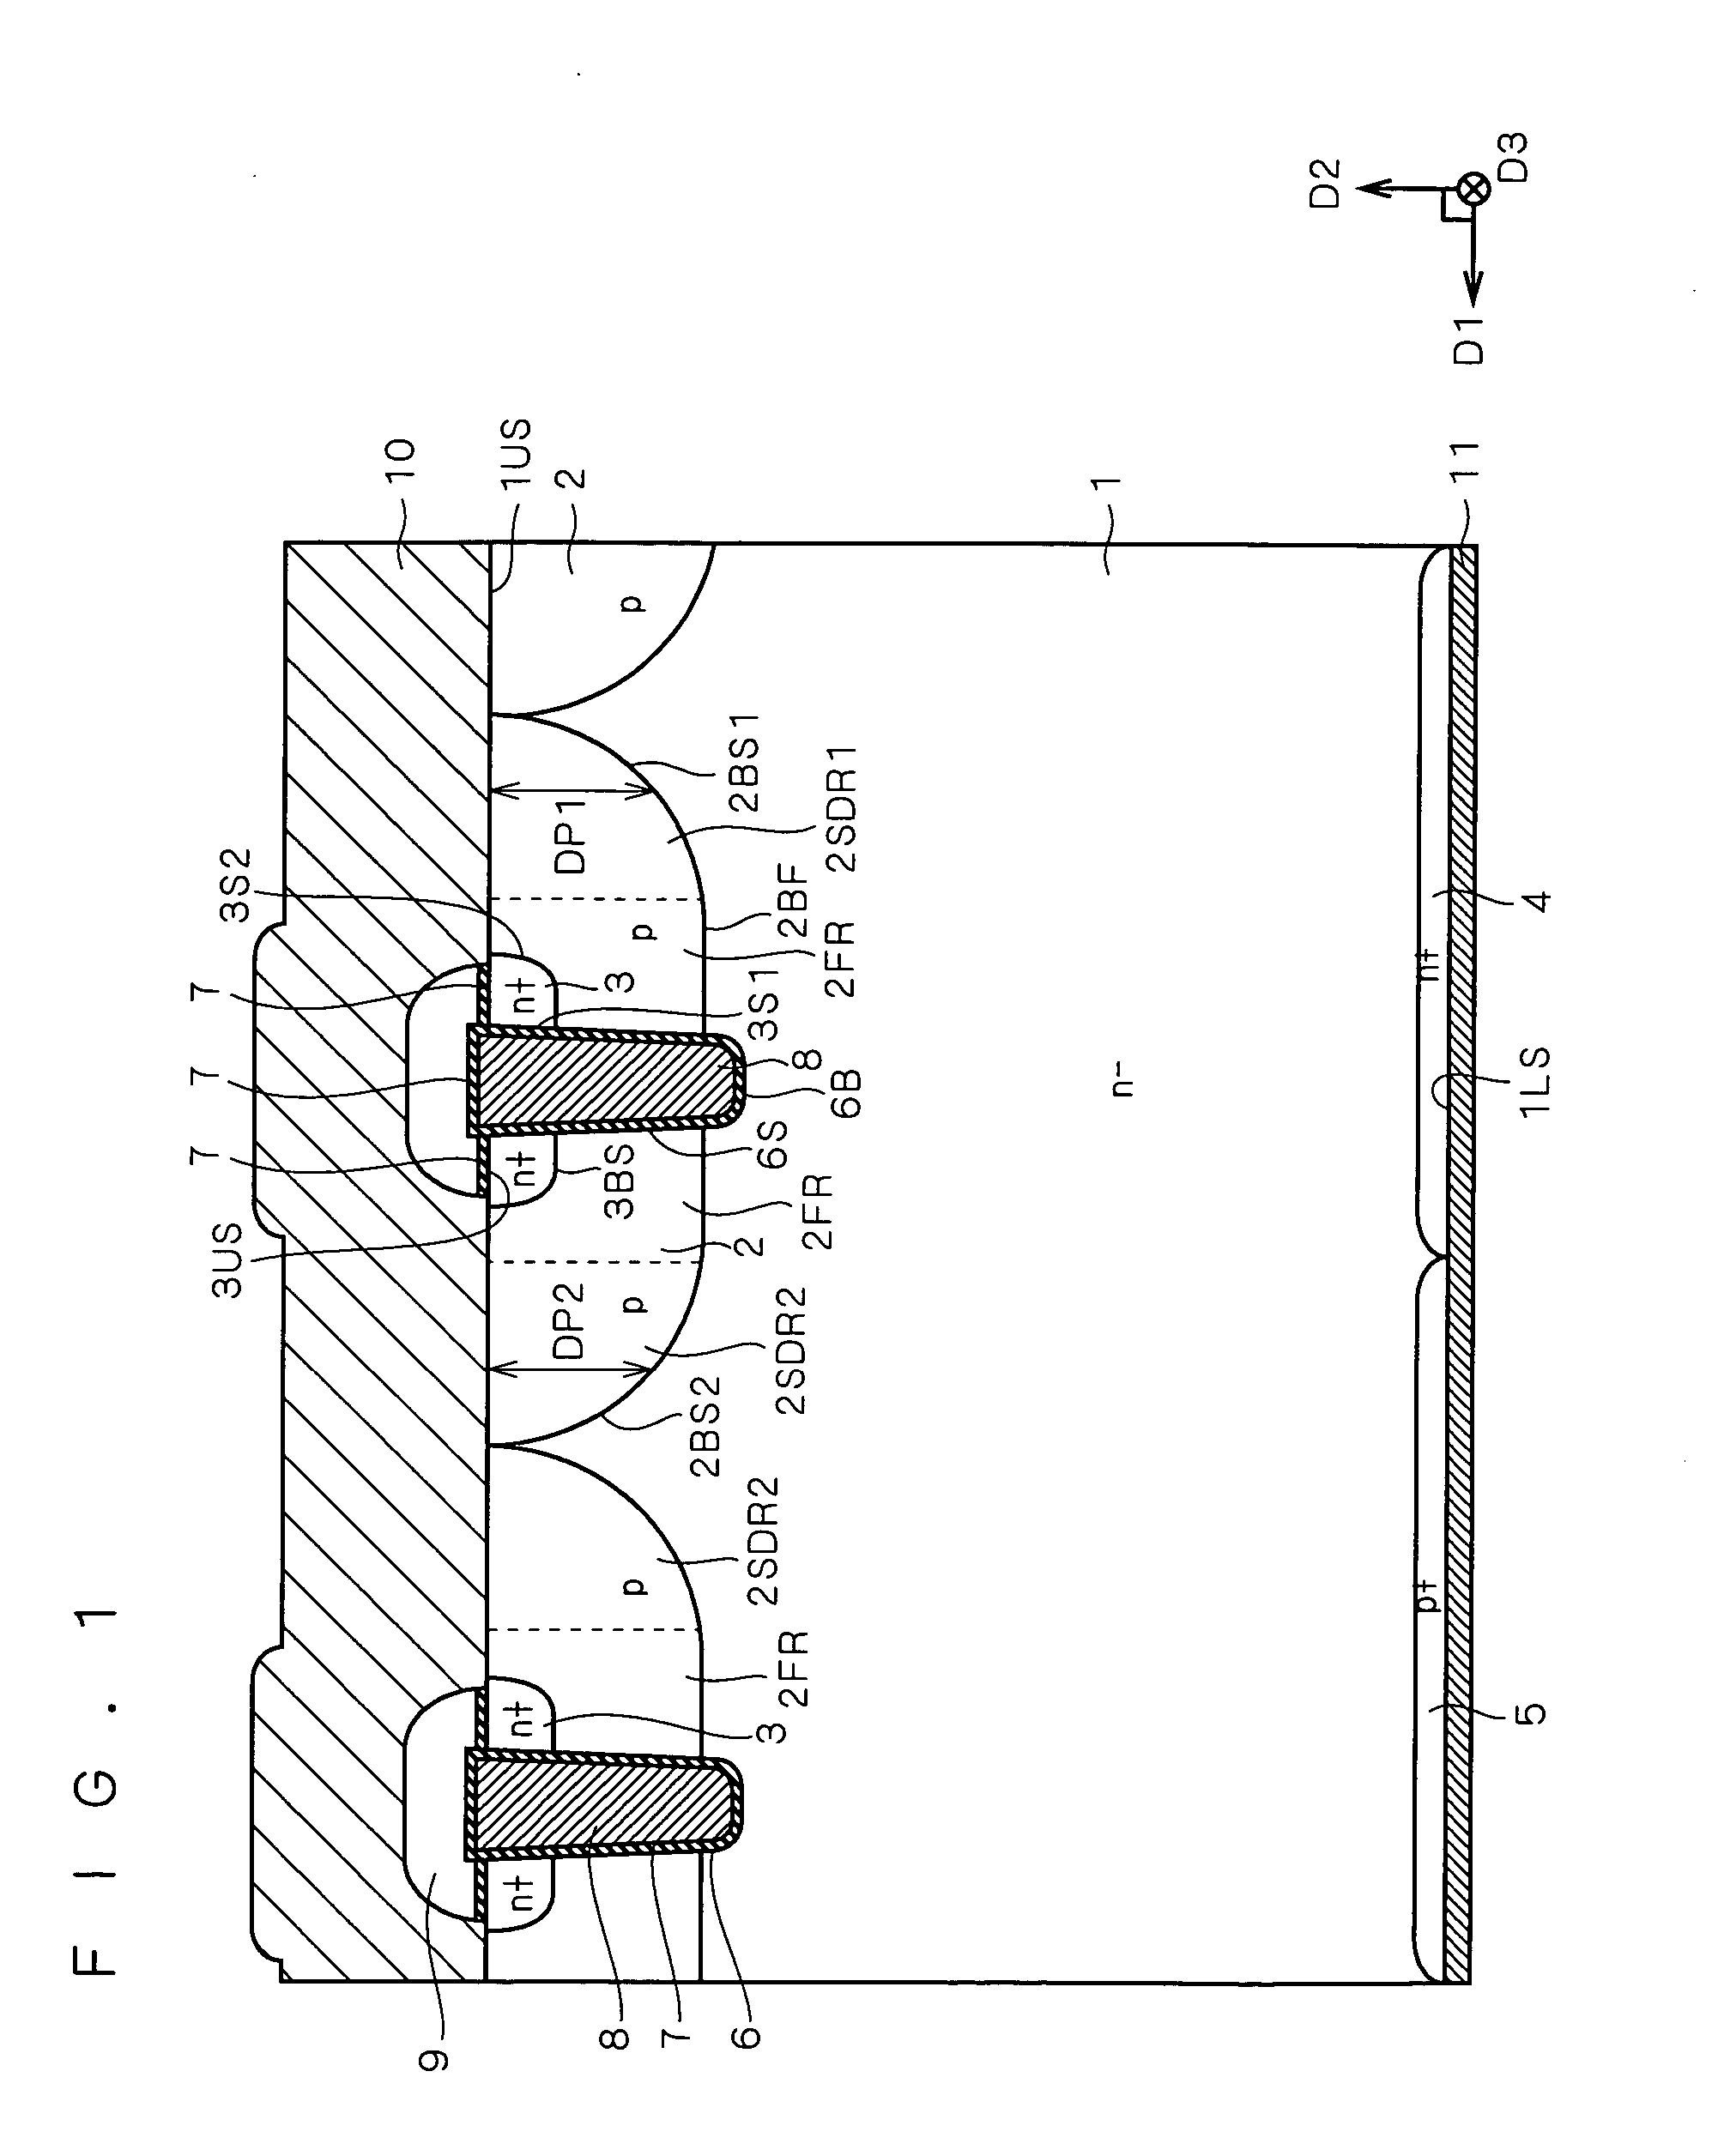 Insulated gate transistor incorporating diode